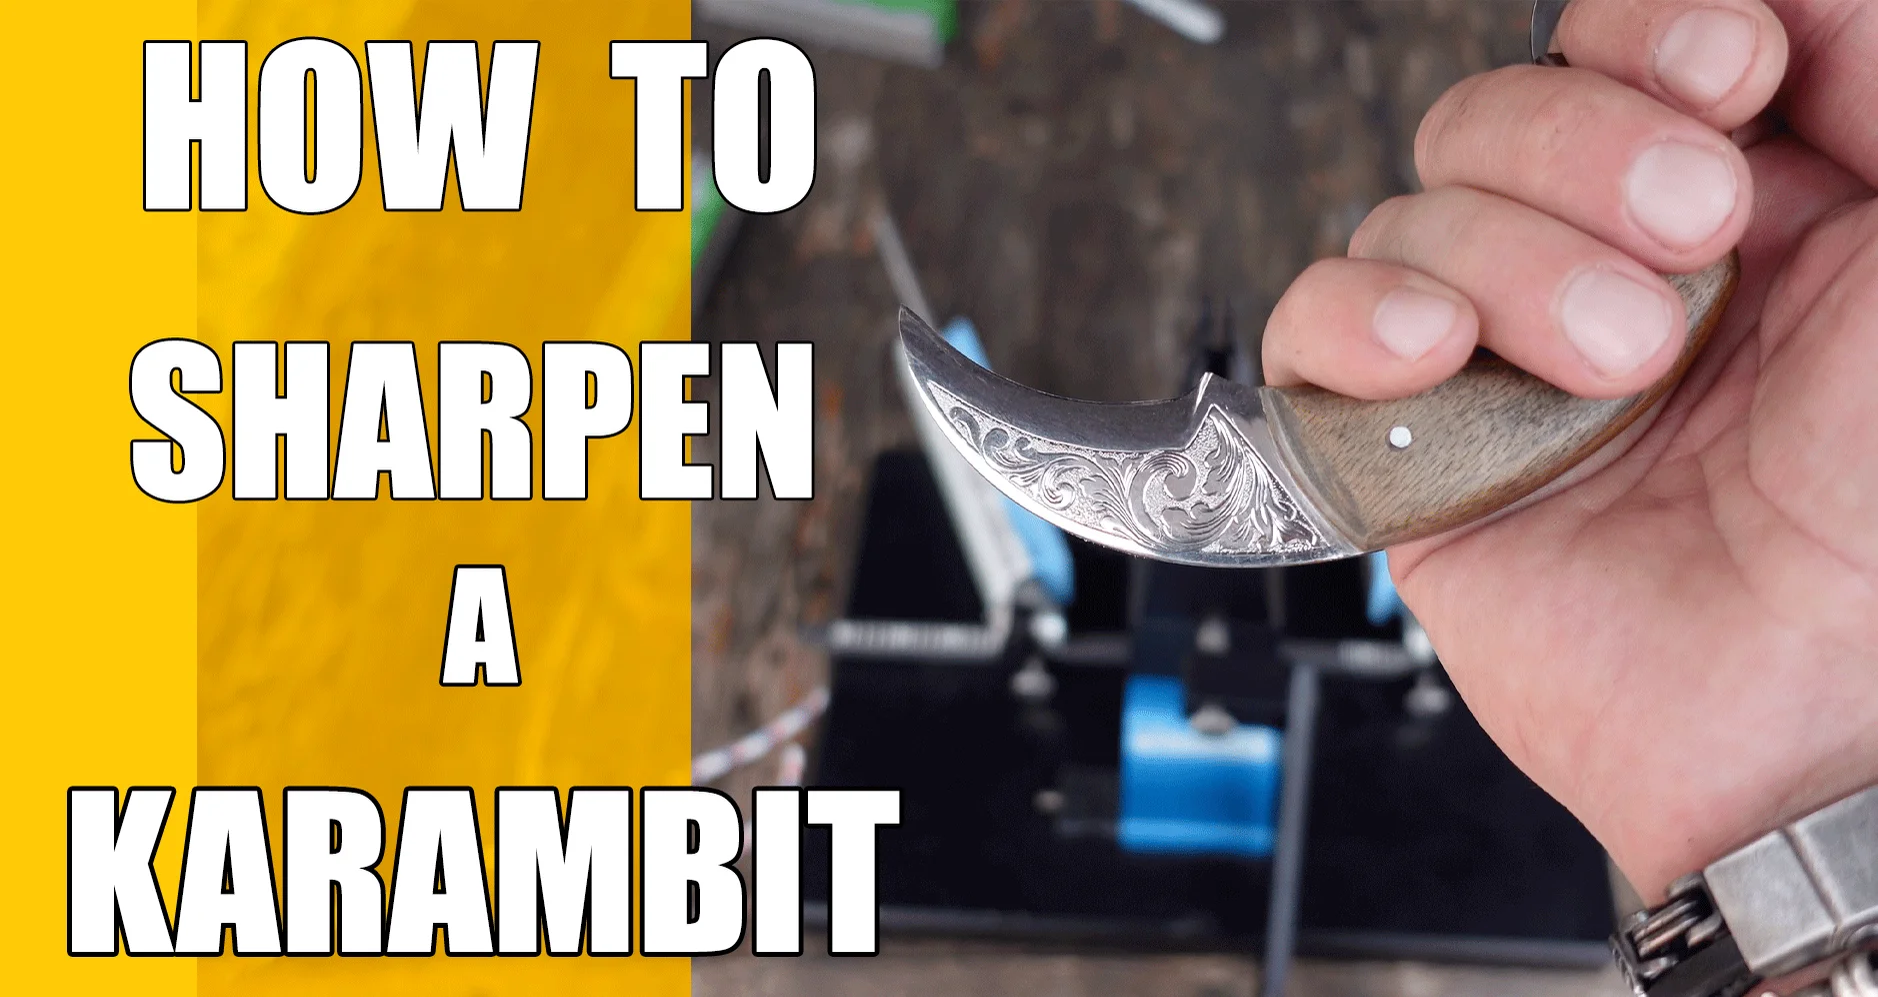 How do I sharpen a curved knife?